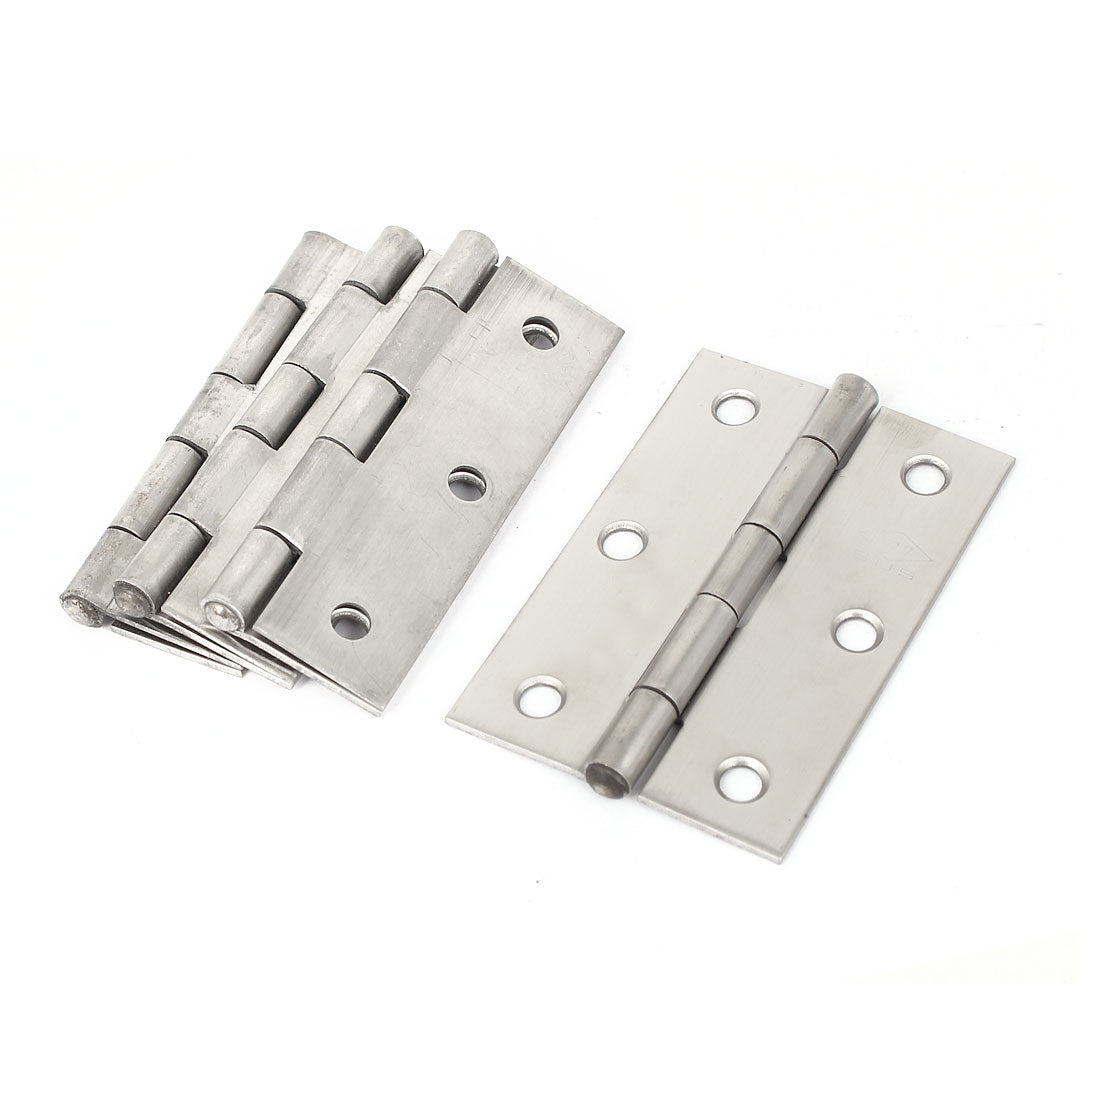 uxcell Uxcell 3" Long Cabinet Gate Closet Door Stainless Steel Hinge 4pcs